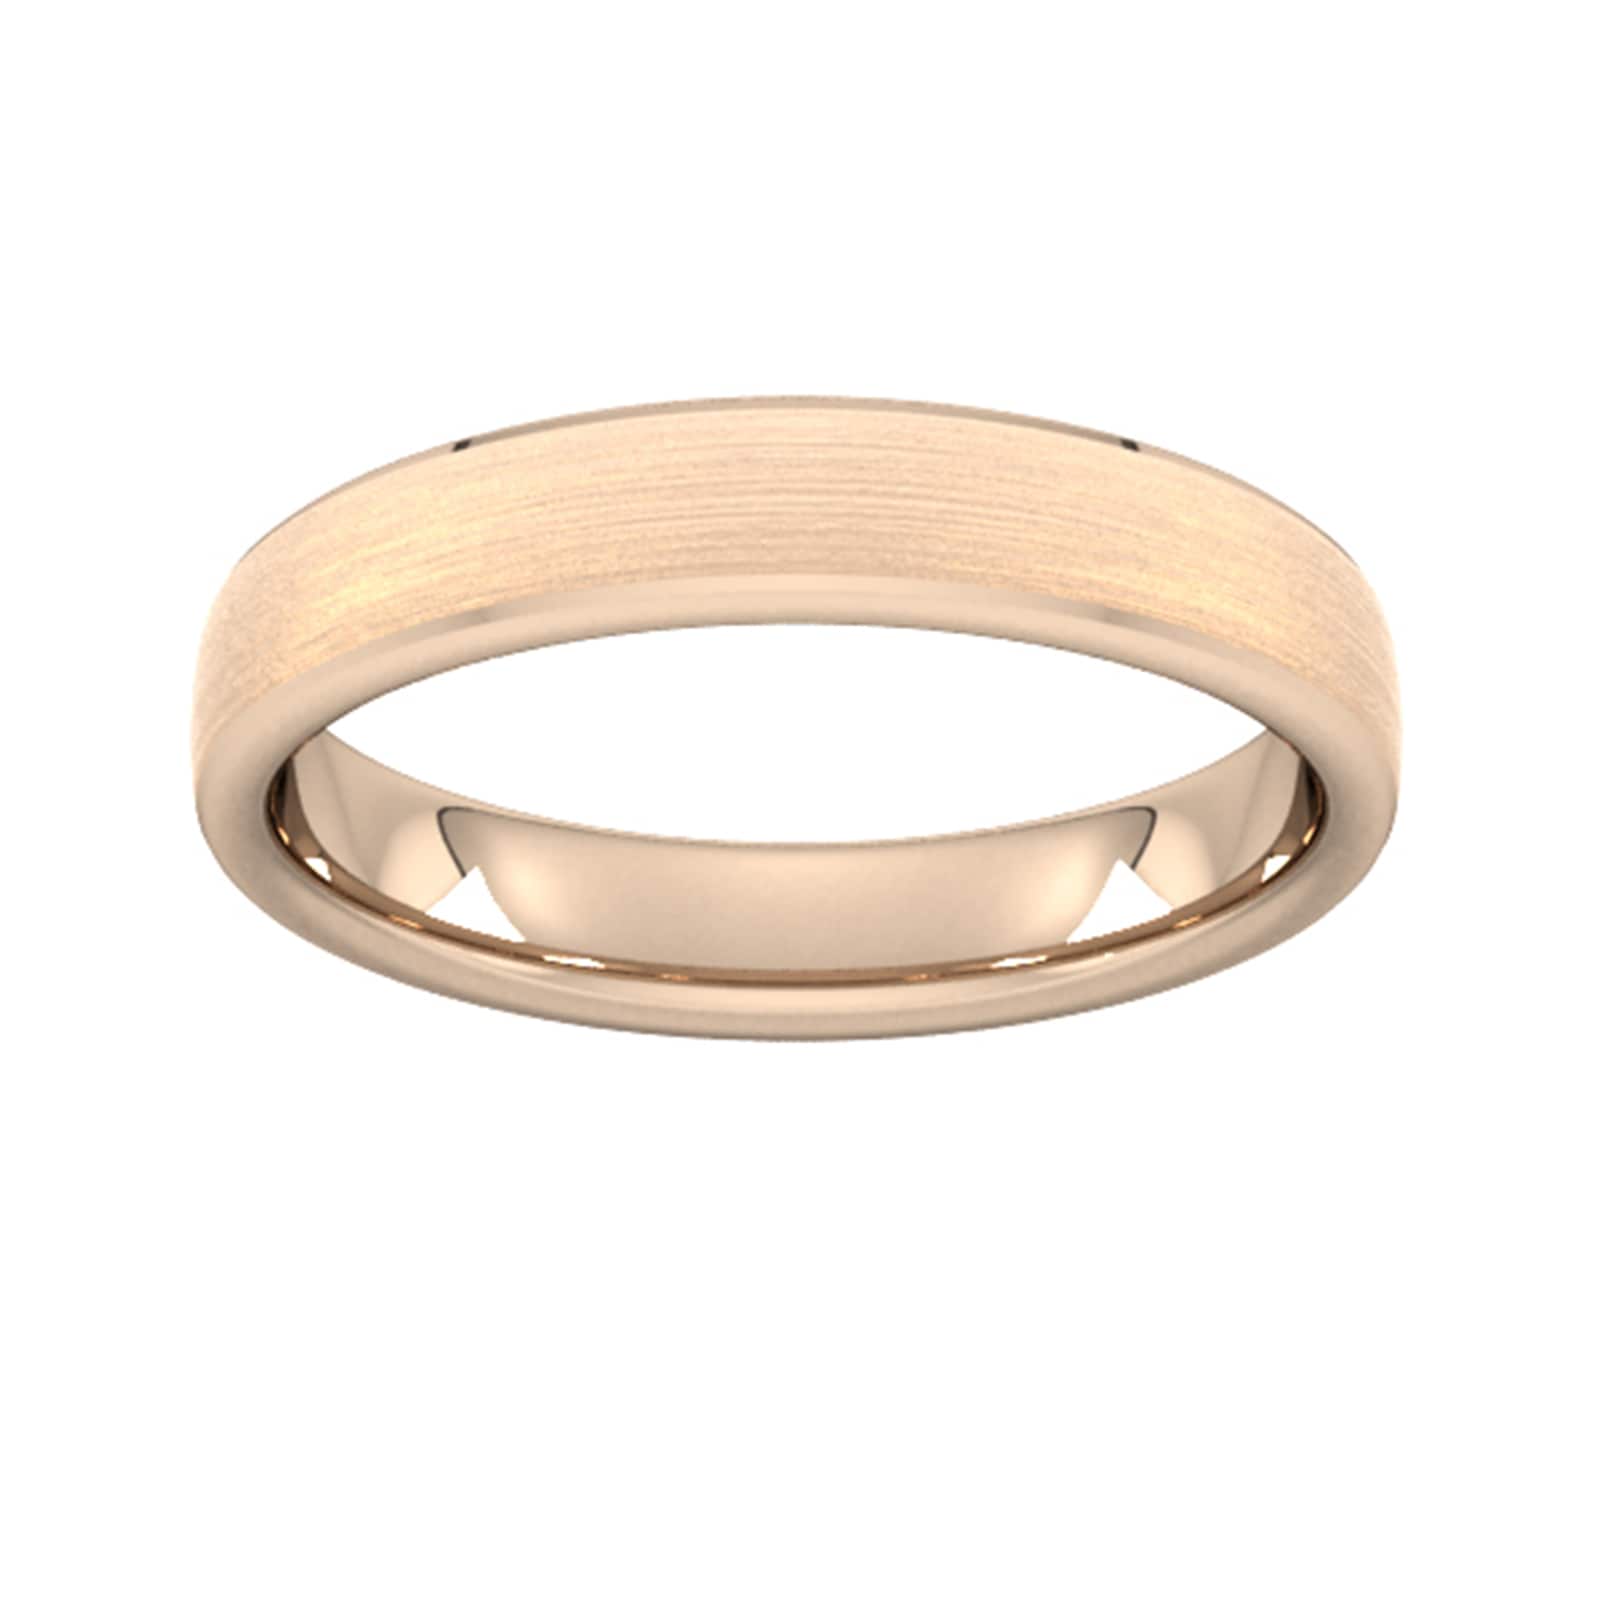 4mm Flat Court Heavy Polished Chamfered Edges With Matt Centre Wedding Ring In 9 Carat Rose Gold - Ring Size W